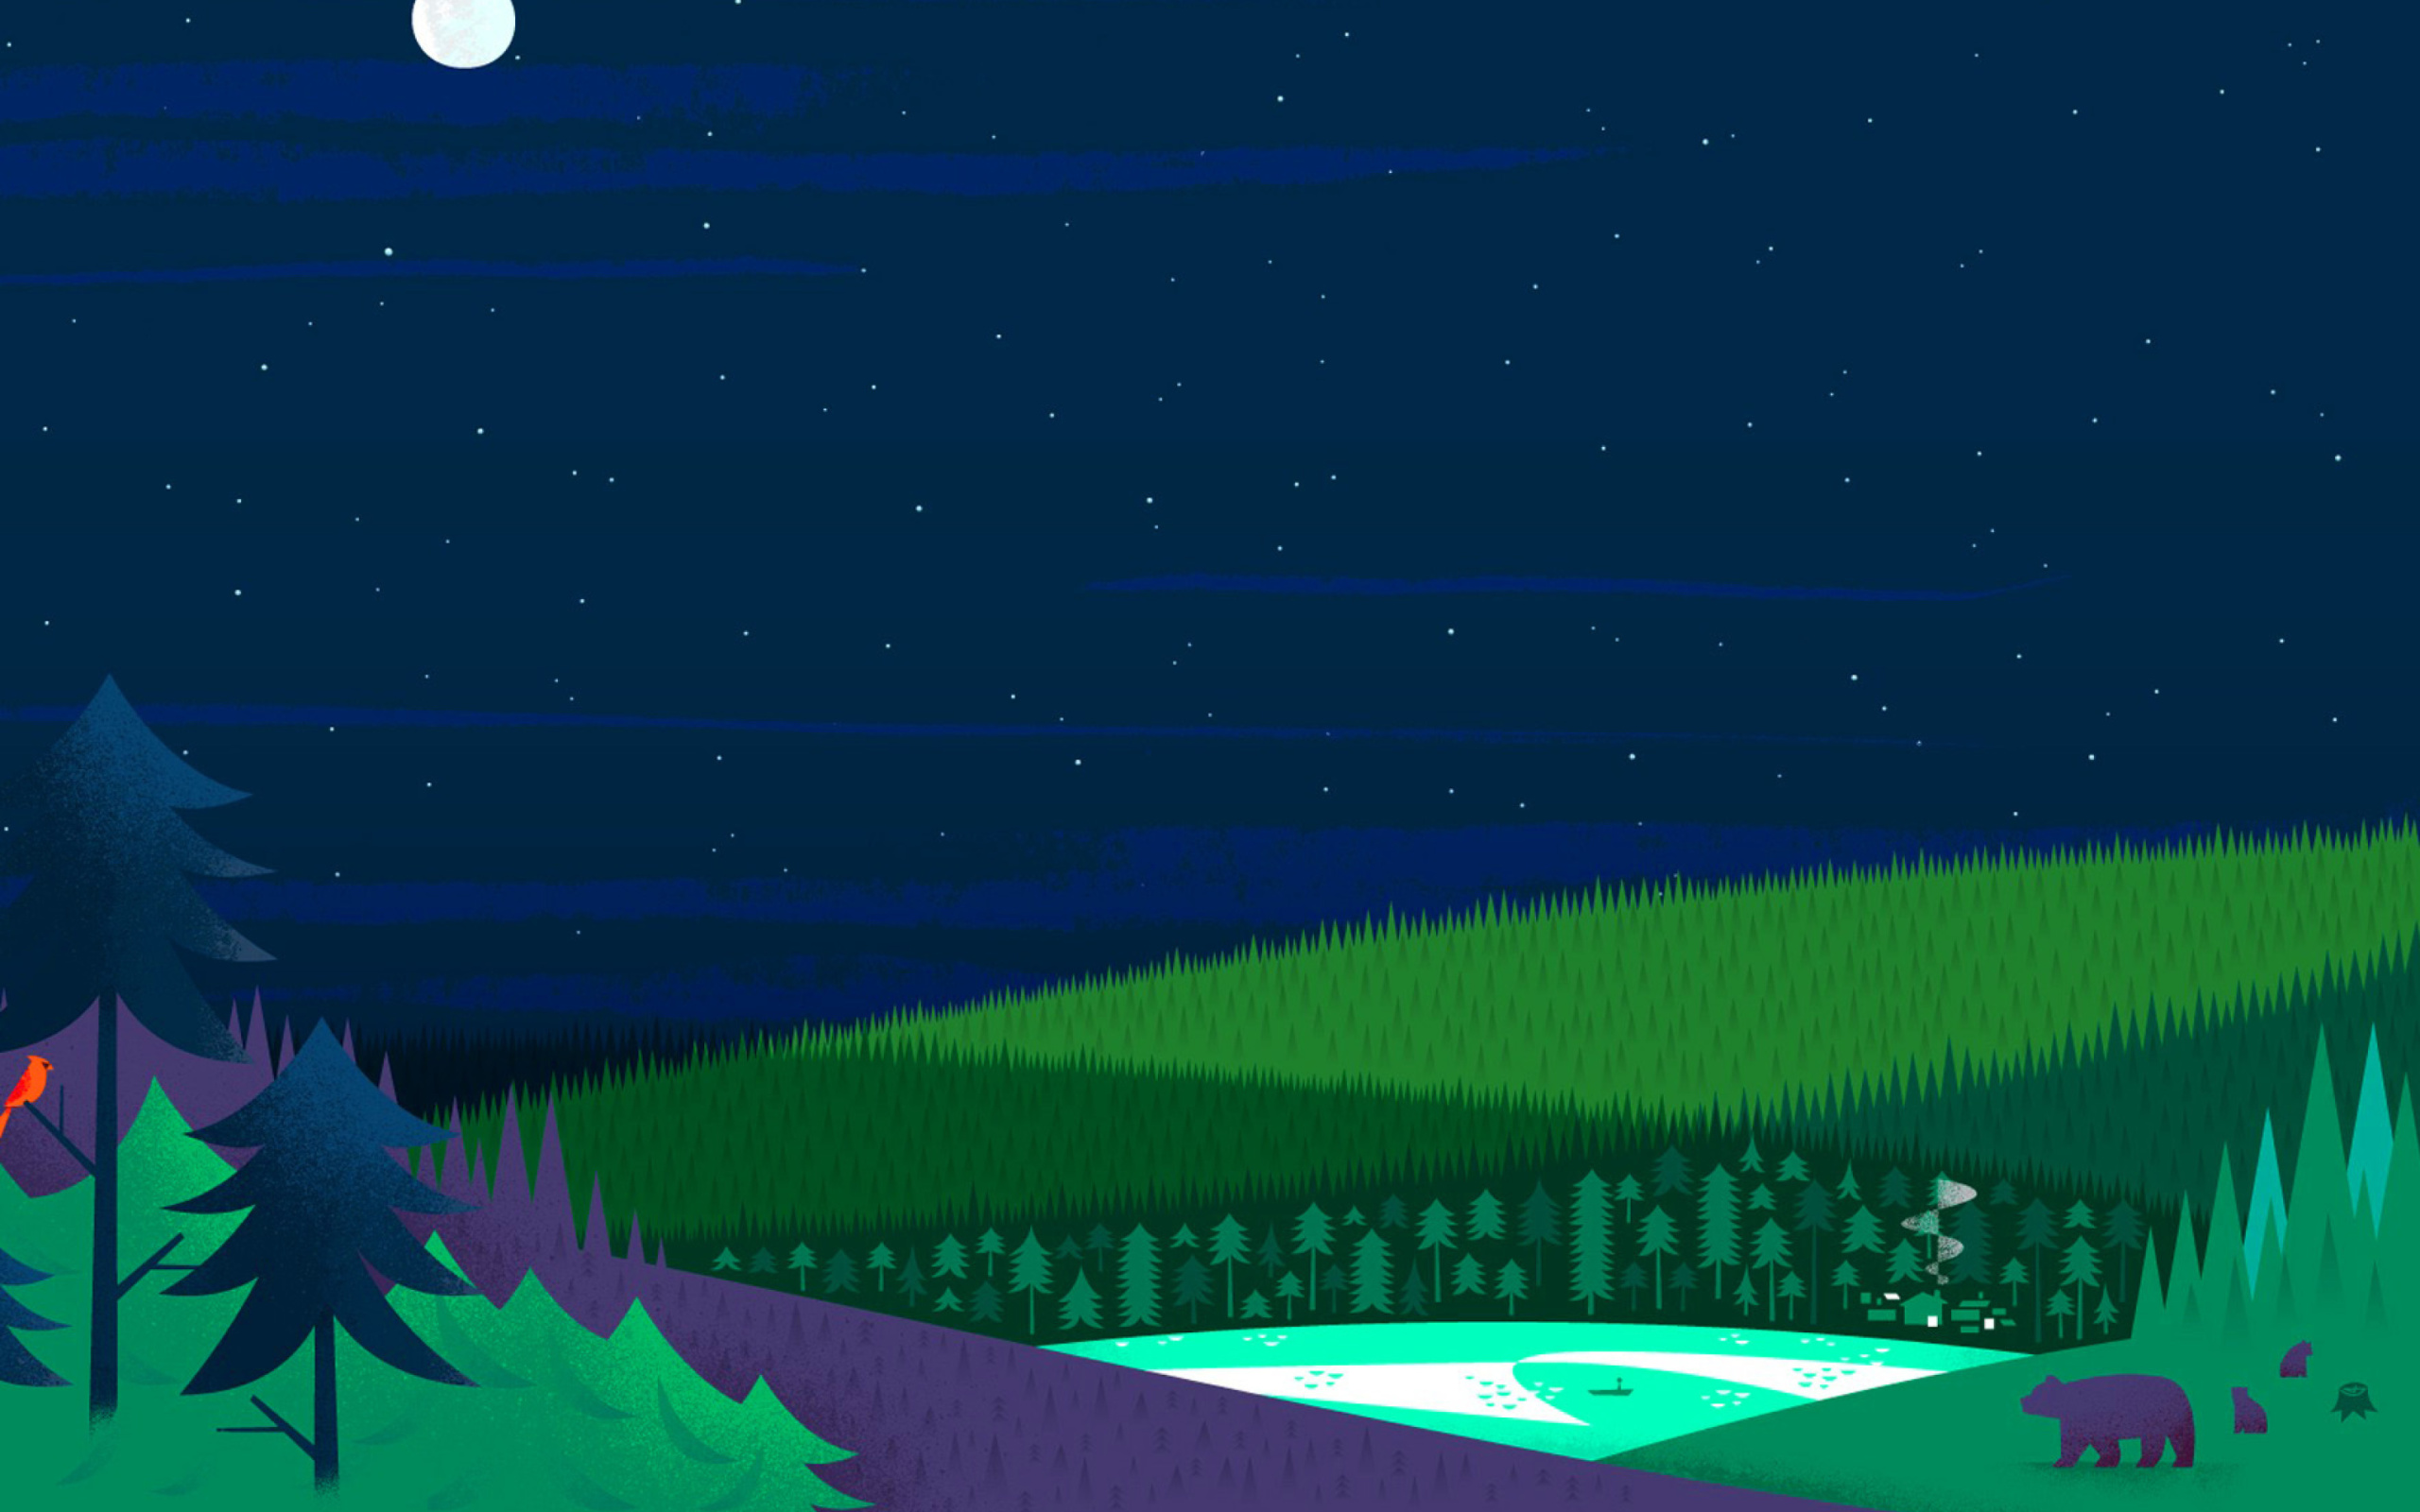 Das Graphics night and bears in forest Wallpaper 2560x1600